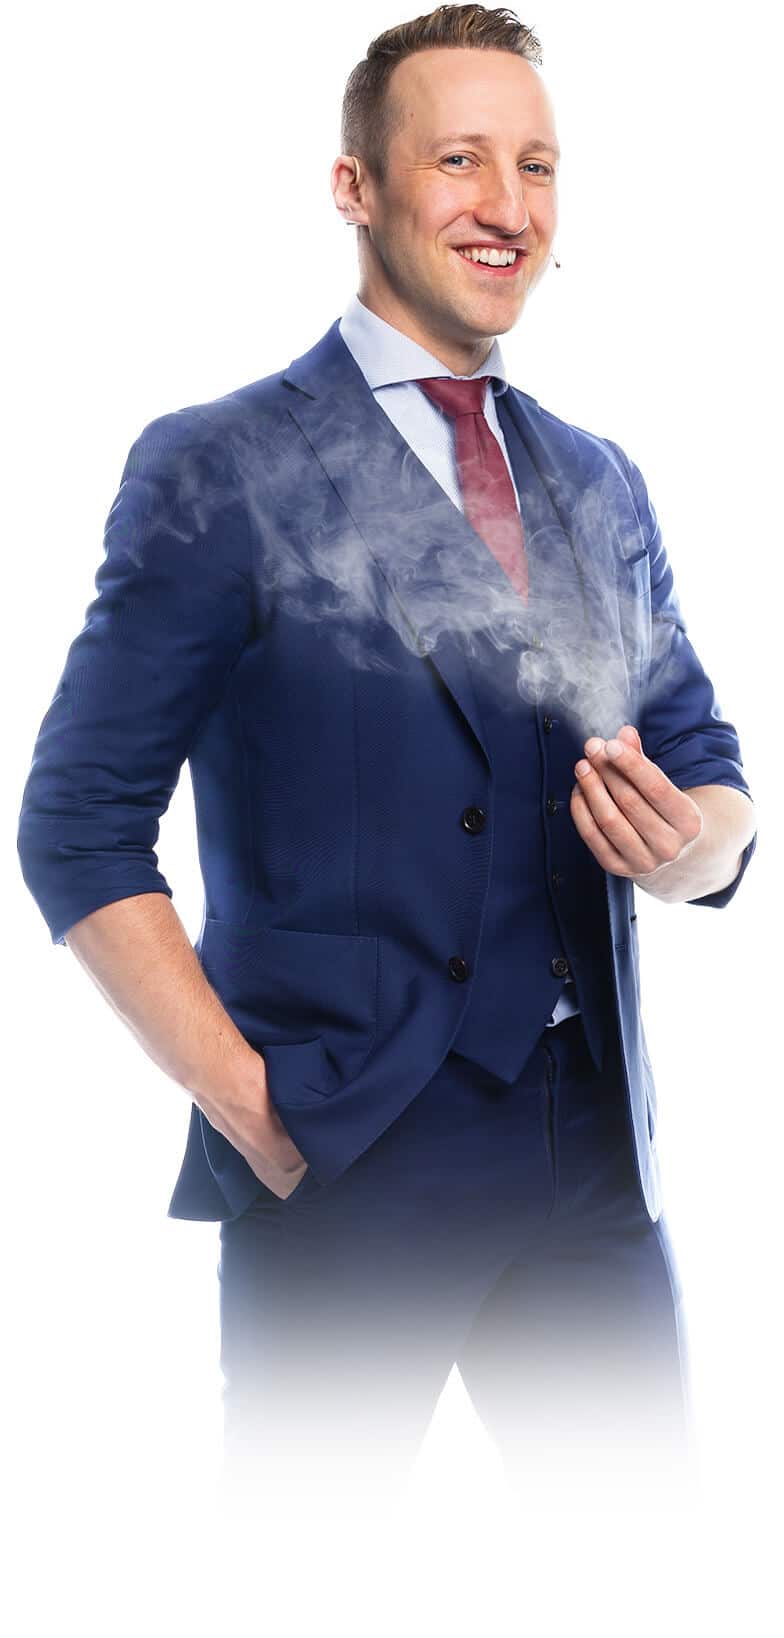 The professional magician and magical artist in Munich (Fabian Schneekind) is smiling into the camera, while magical smoke is developing at his fingertips. You can book him as a magical entertainer, closeup magician, wedding magician and corporate event magician.